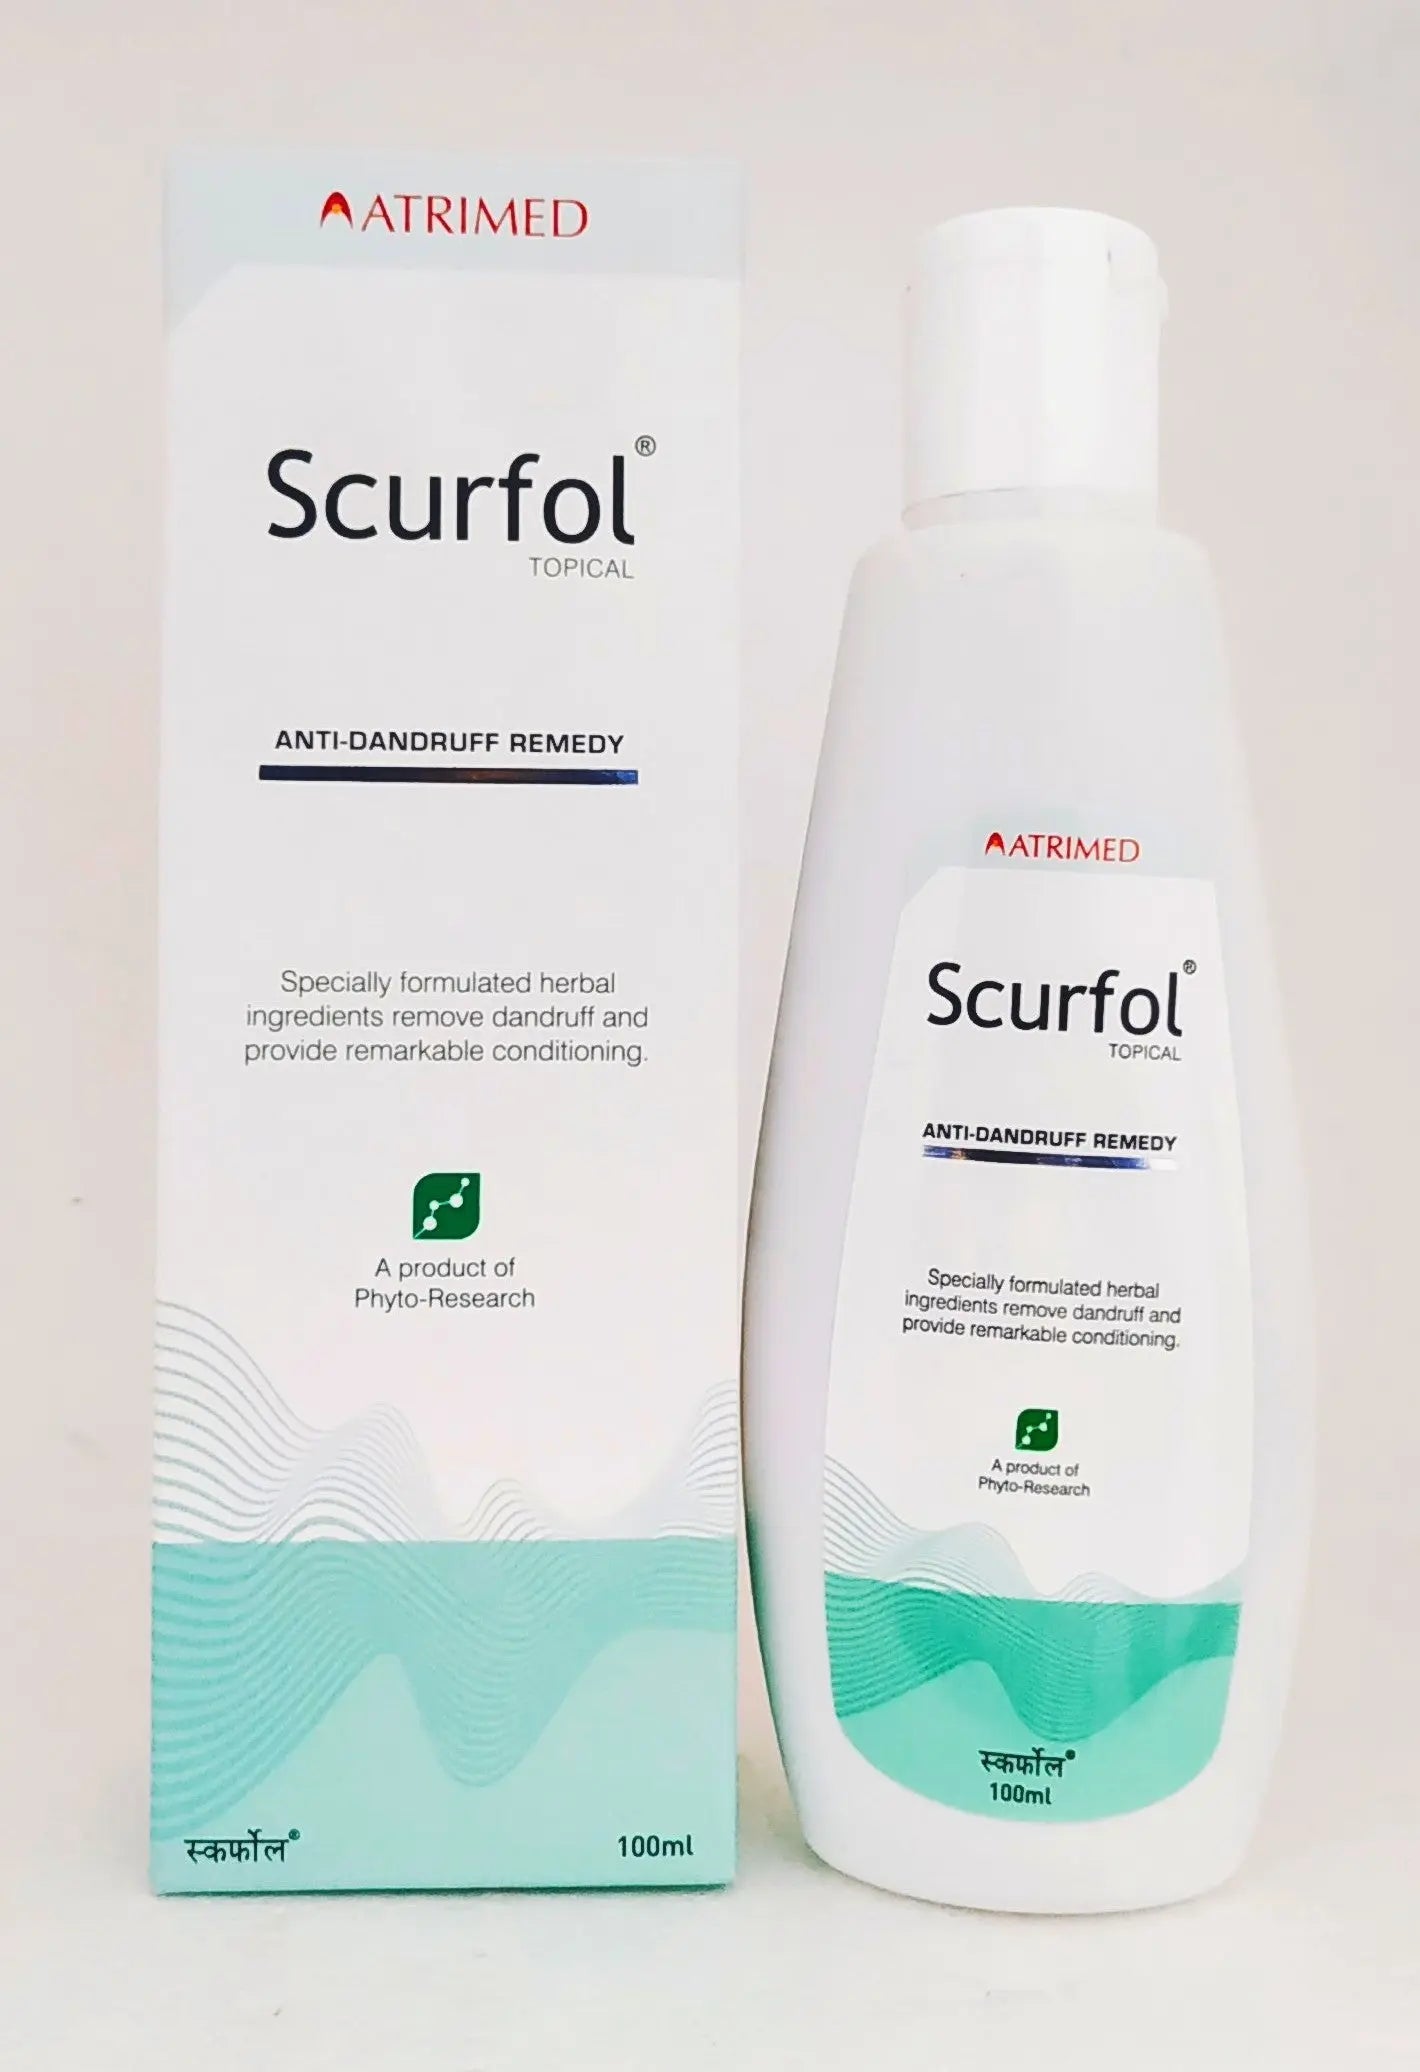 Scurfol Topical 100ml Atrimed